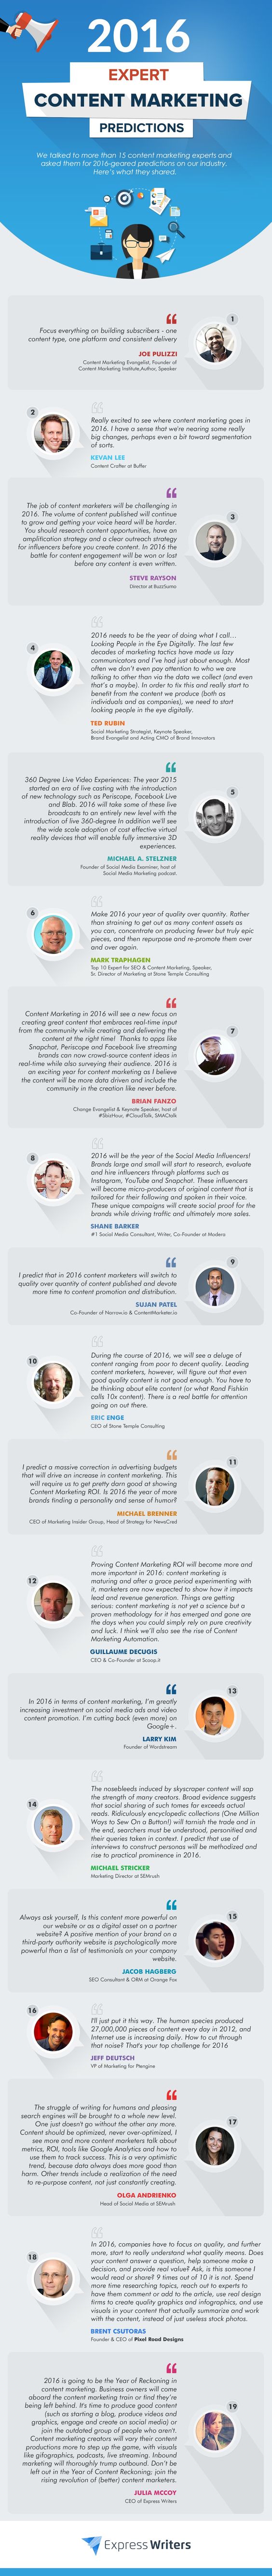 The Future of Content Marketing: 19 Experts Share Their 2016 Predictions - infographic